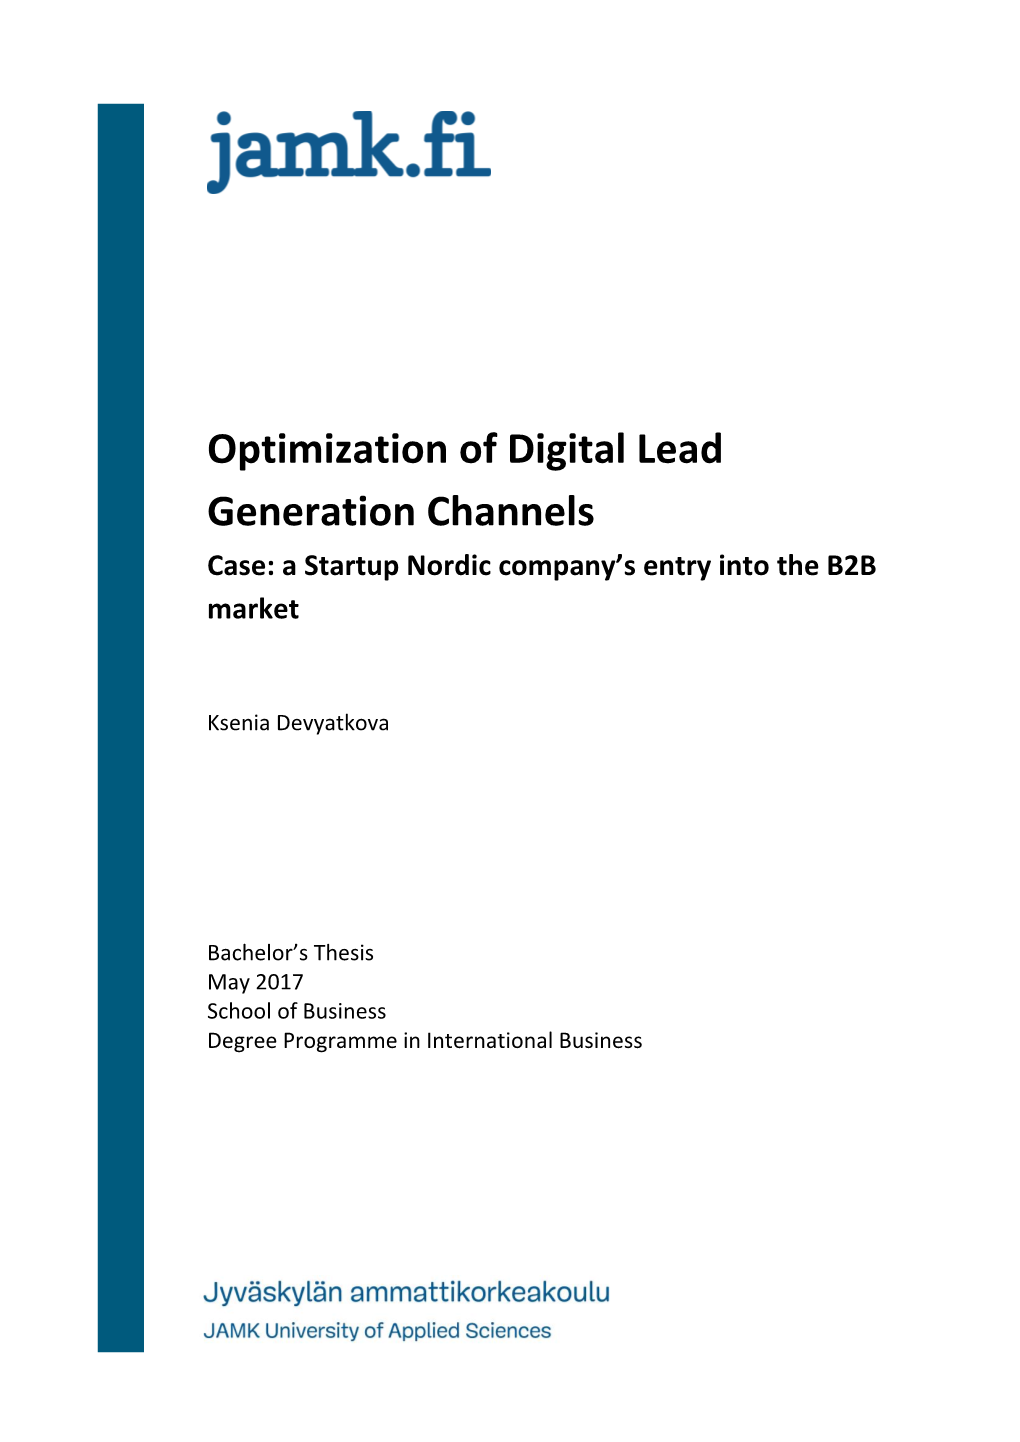 Optimization of Digital Lead Generation Channels Case: a Startup Nordic Company’S Entry Into the B2B Market